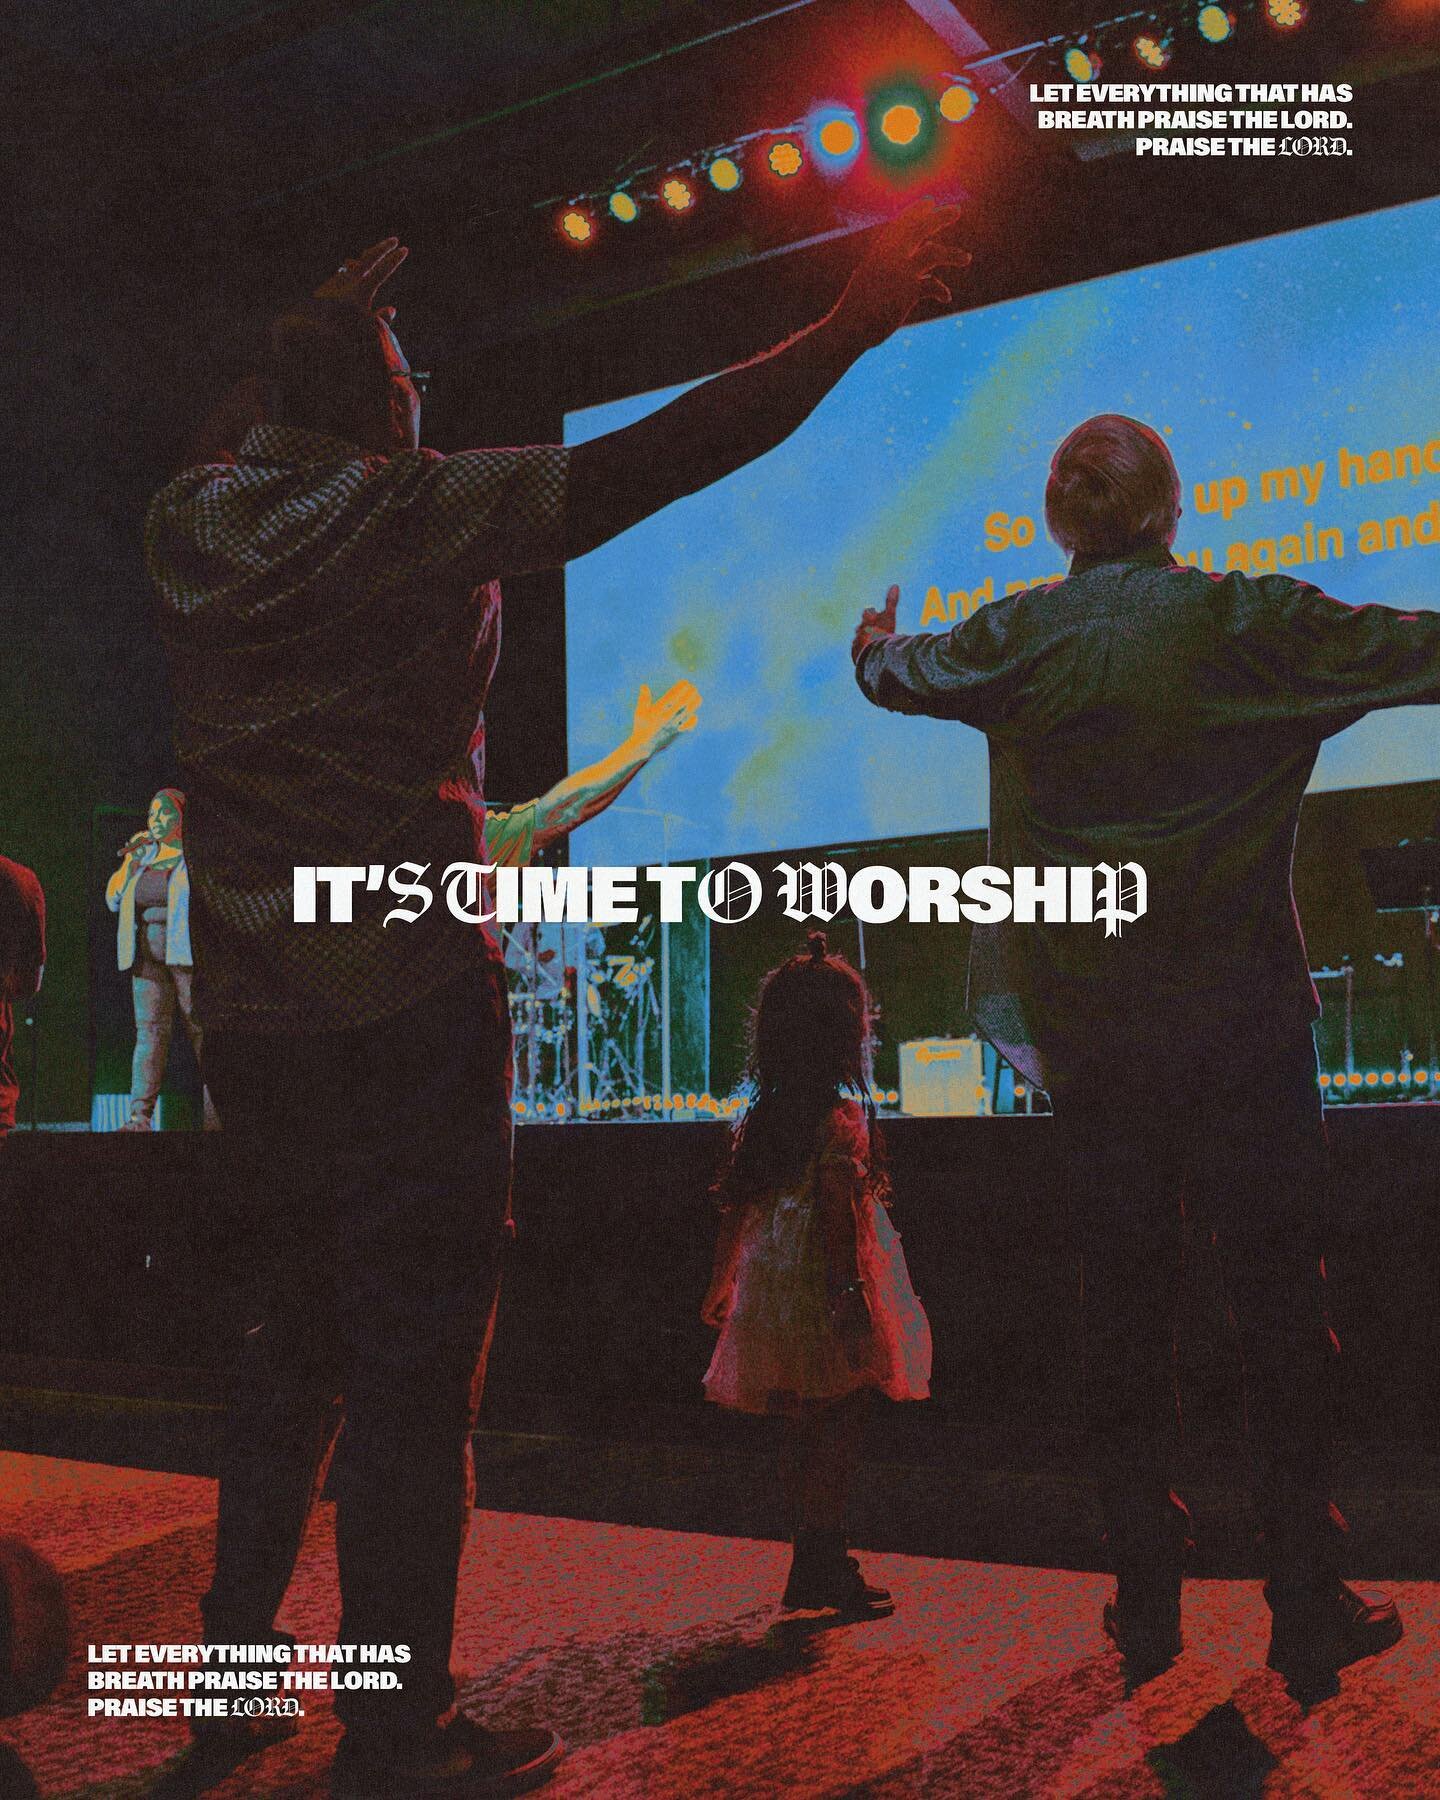 See you all at 6:30! It&rsquo;s time to worship!